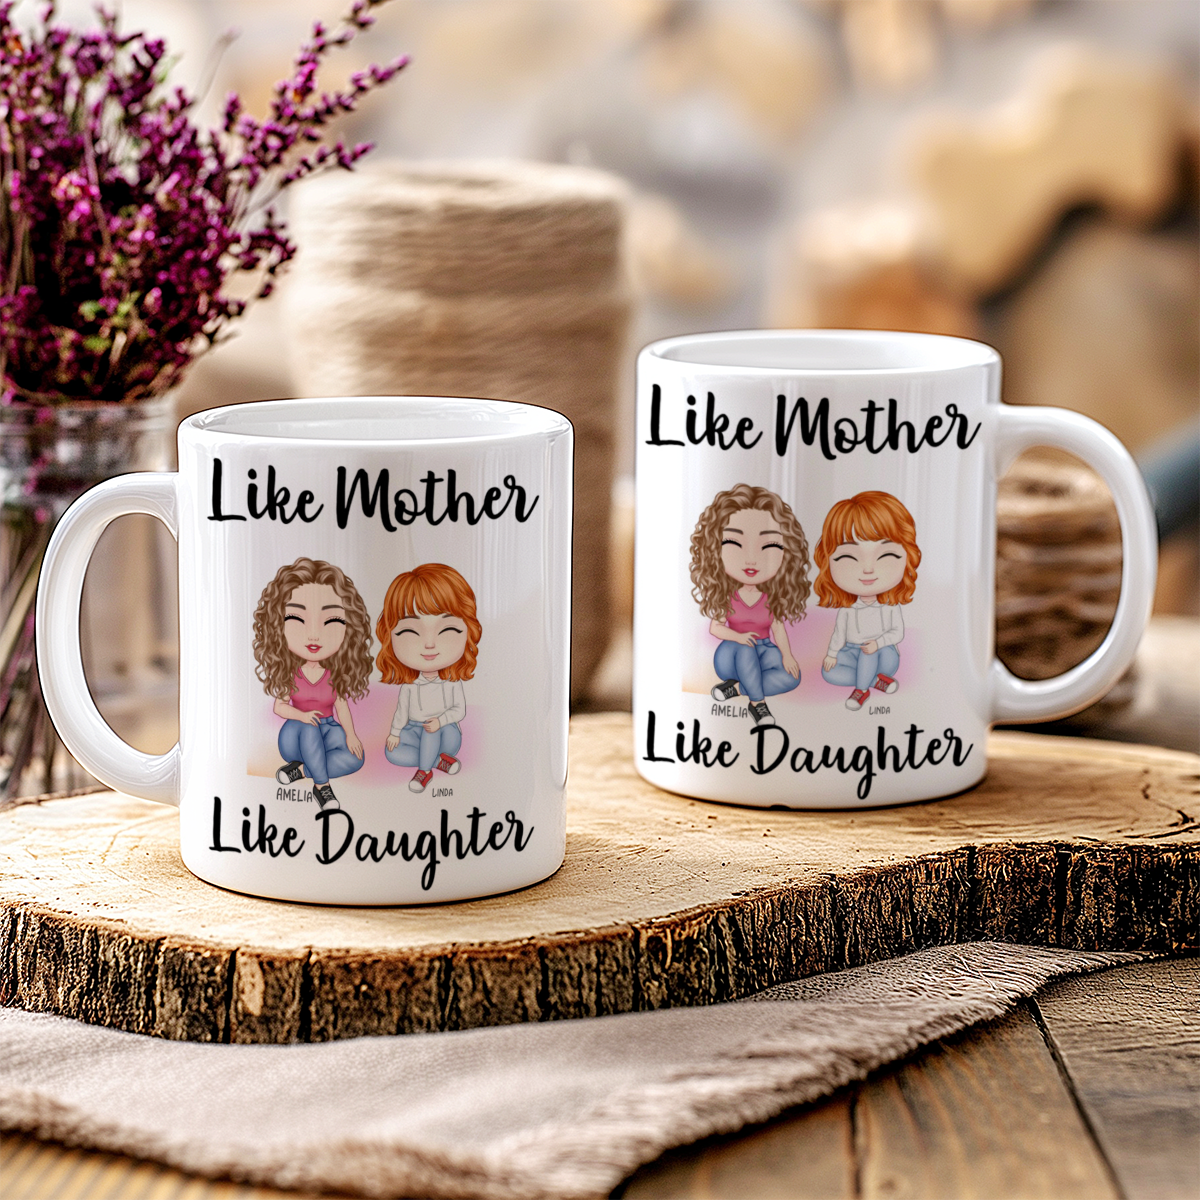 Like Mother Like Daughter- Personalized Mug for Mom and Daughter